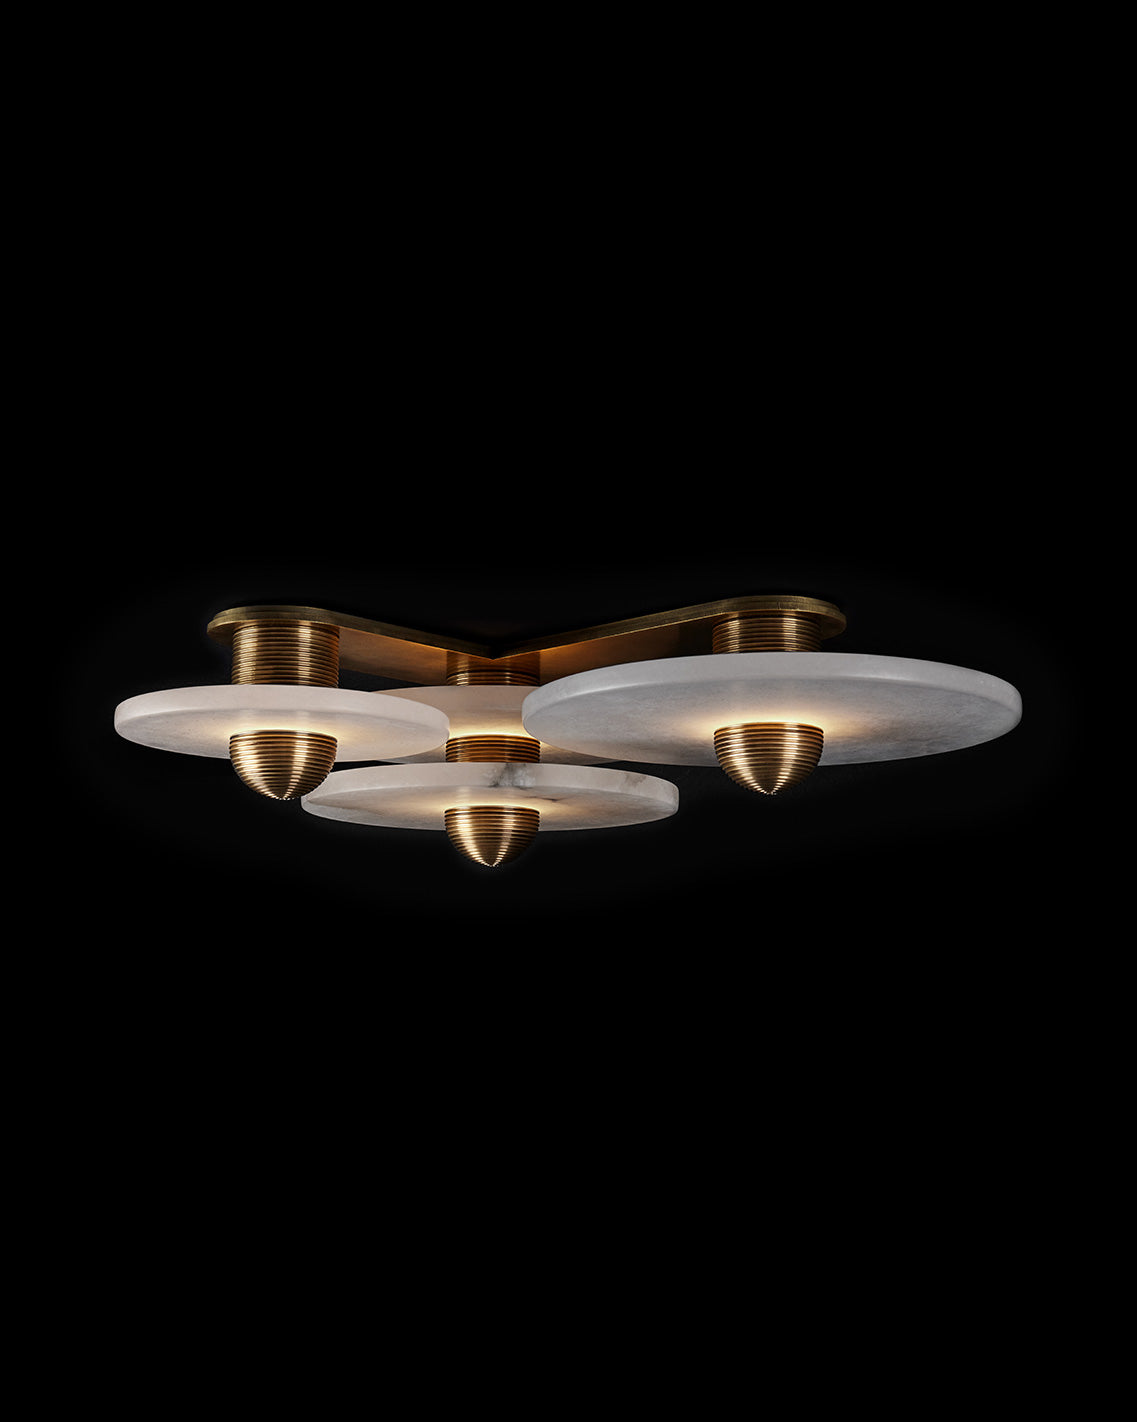 MEDIAN : 3 surface light in Aged Brass finish, mounted to a black ceiling. 